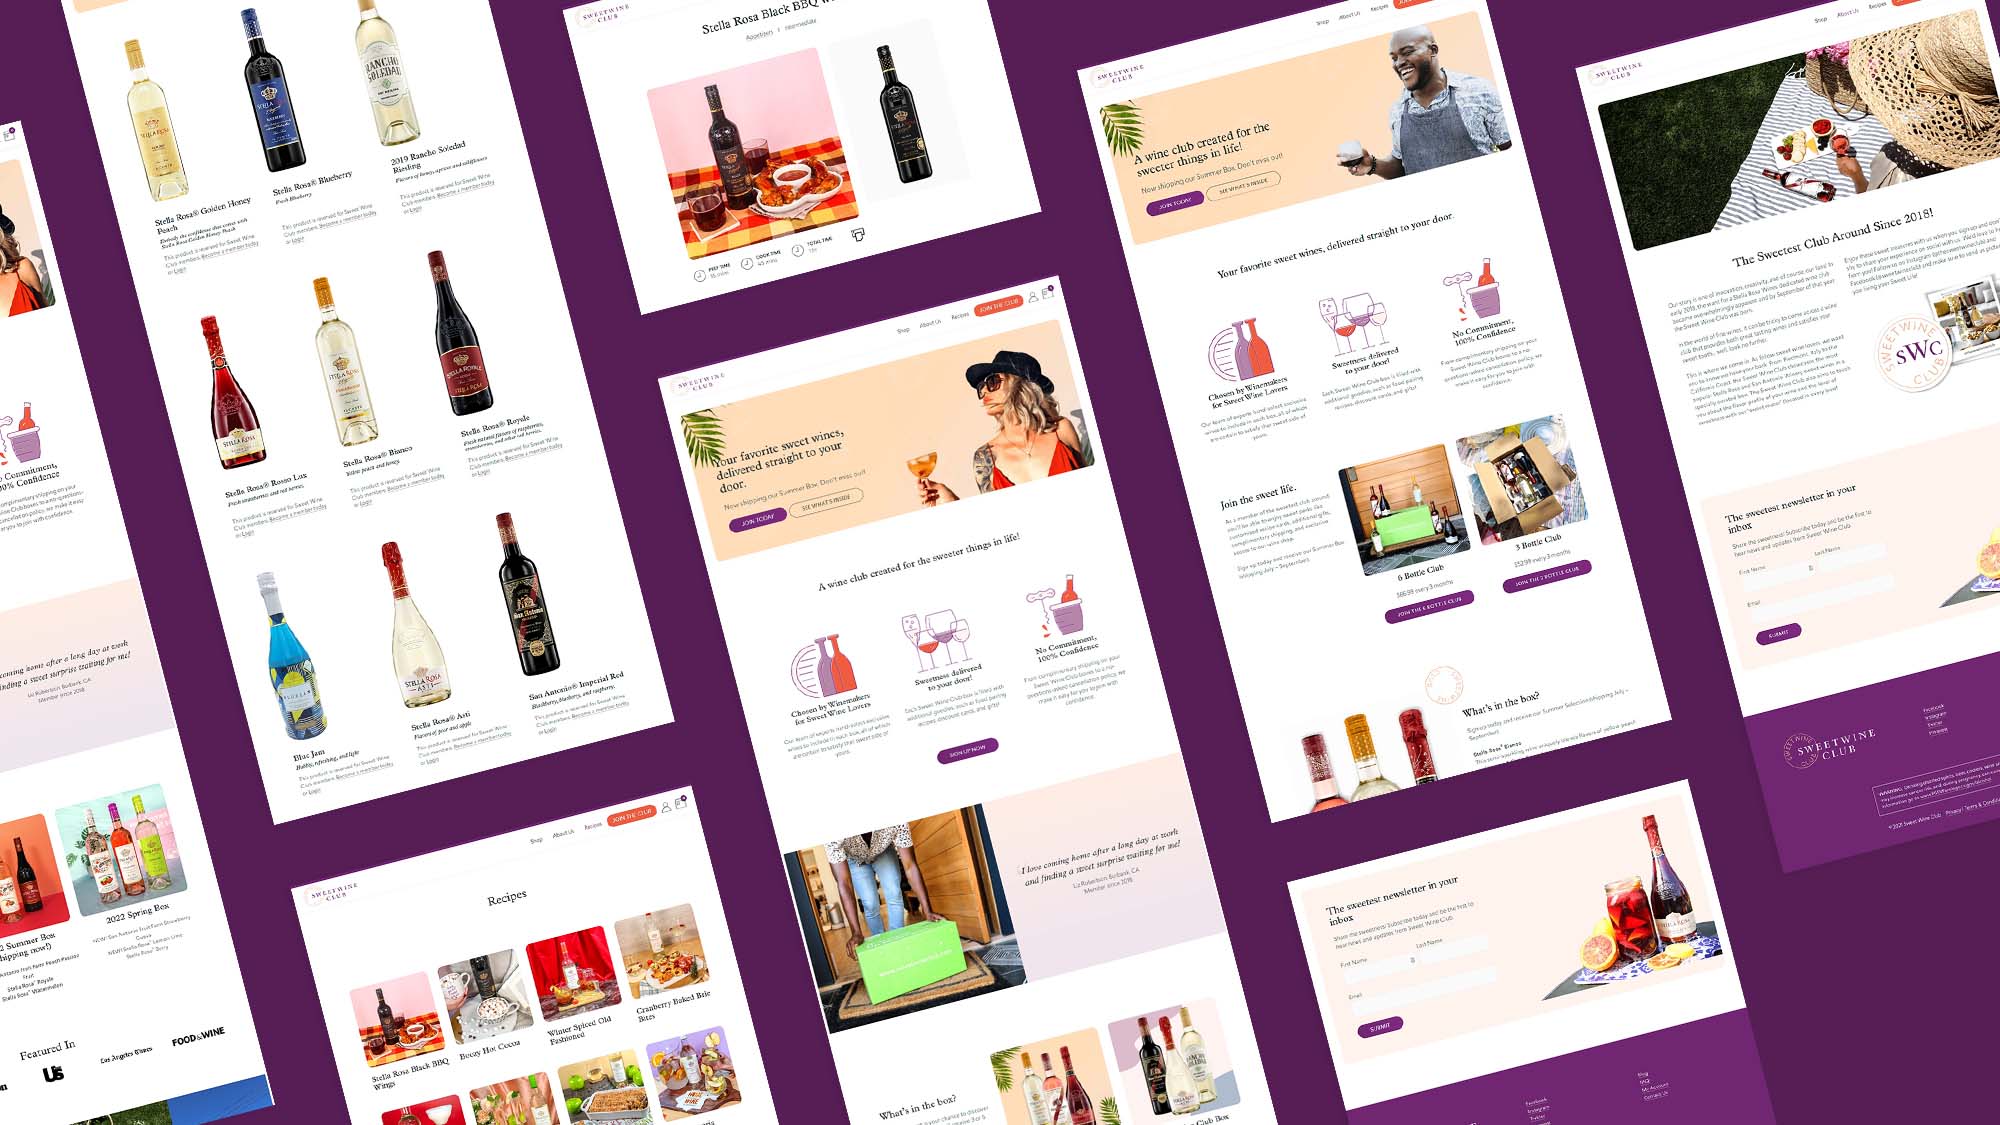 Mockup showing the various pages of Sweet Wine Club's website designed by 5forests